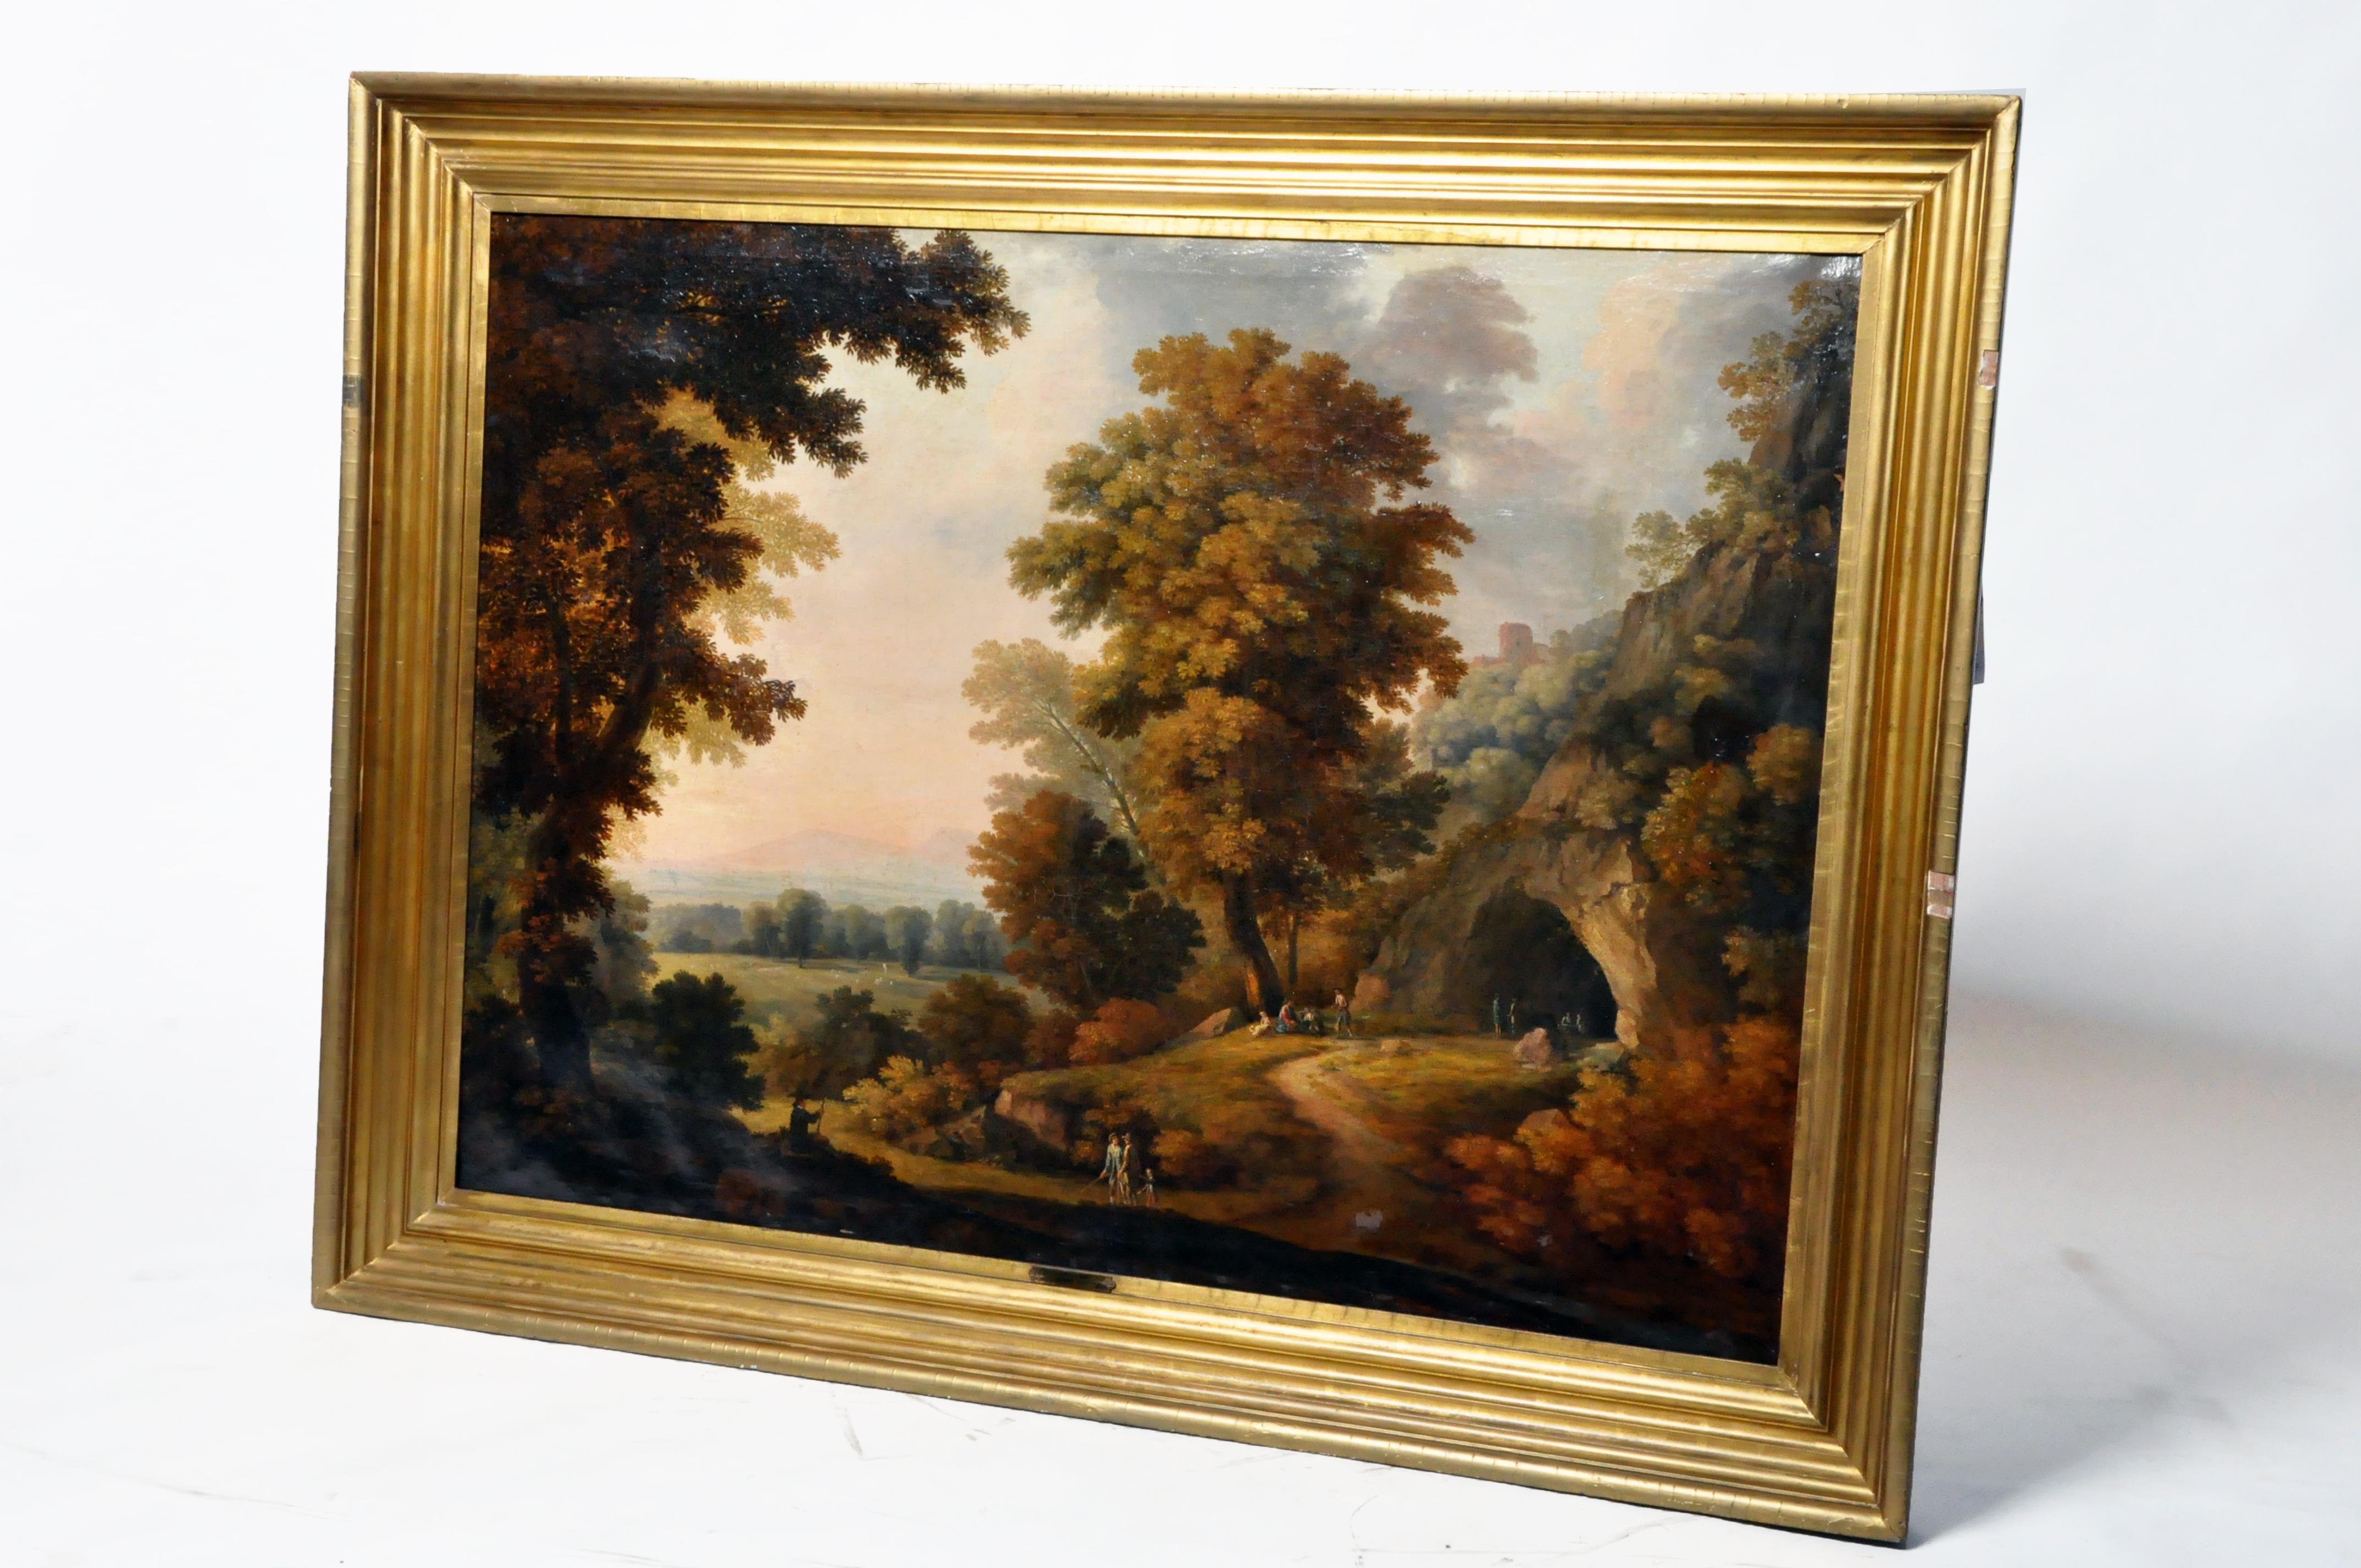 Depicting an Italian scene; likely 18th century. The painter is unknown but likely Flemish. The canvas is in good overall good condition, with its original stretcher intact. There are significant repairs made at different times. The painting depicts